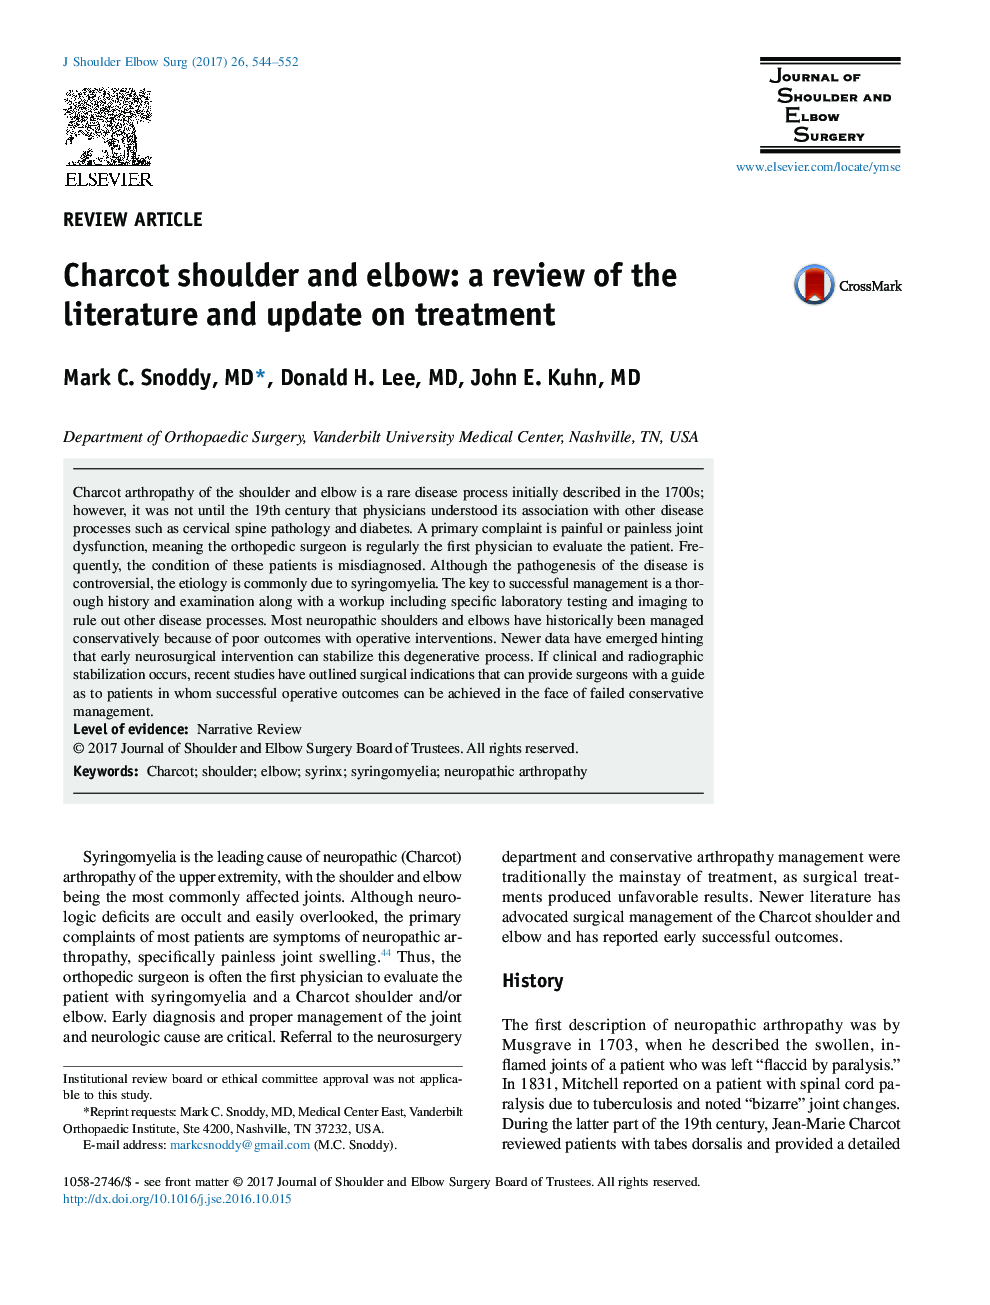 Charcot shoulder and elbow: a review of the literature and update on treatment